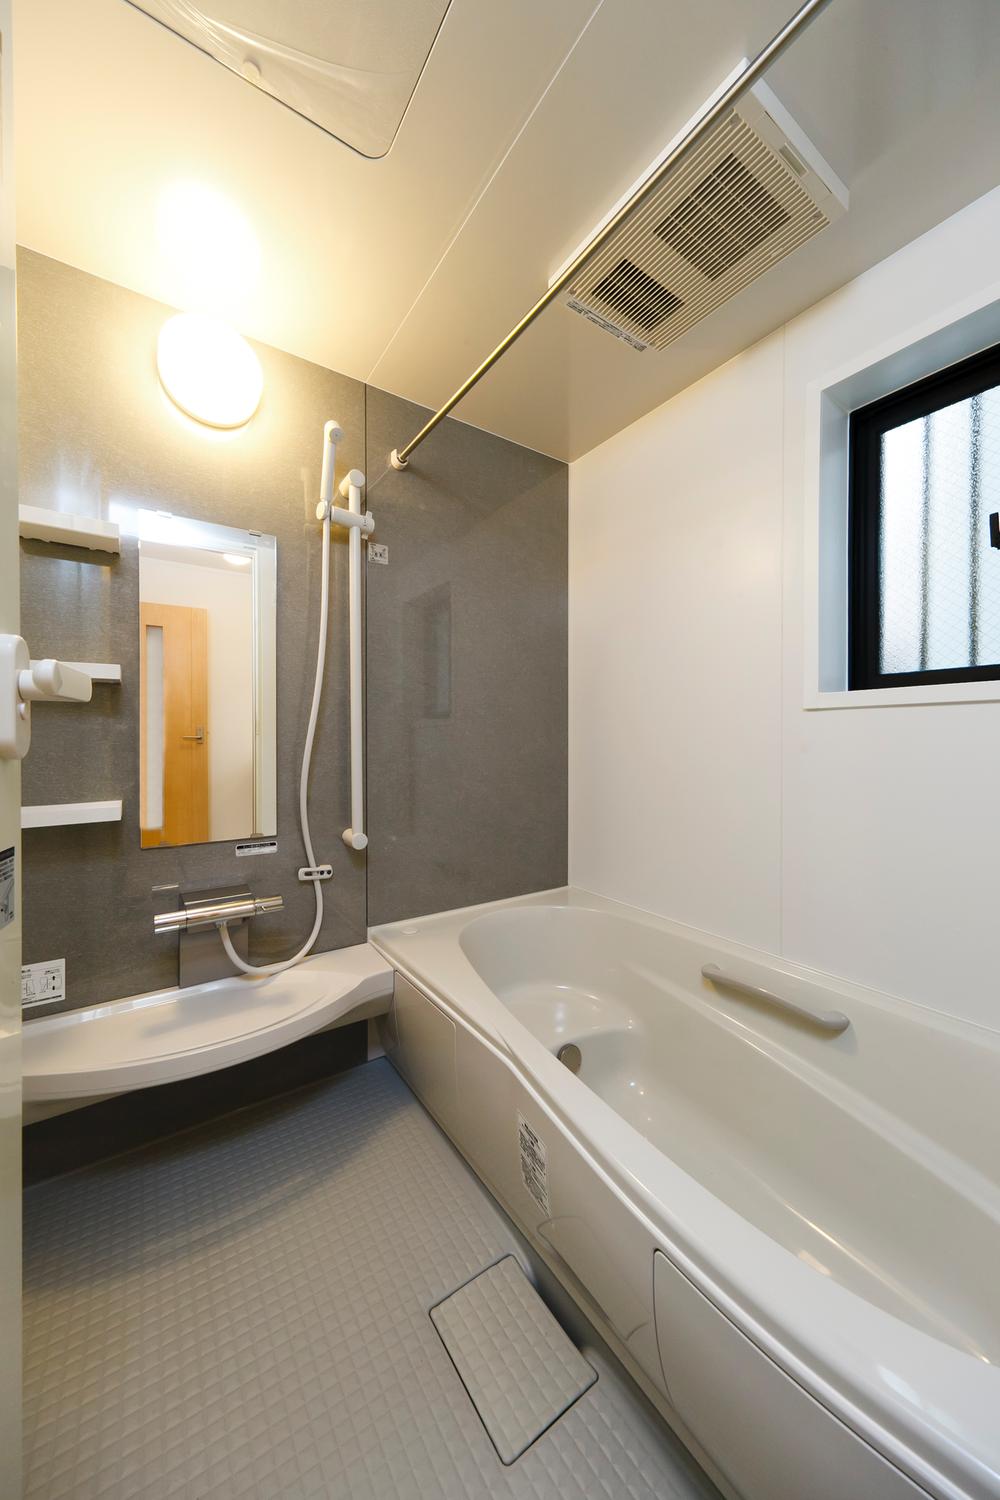 Same specifications photo (bathroom). Same specifications Photos